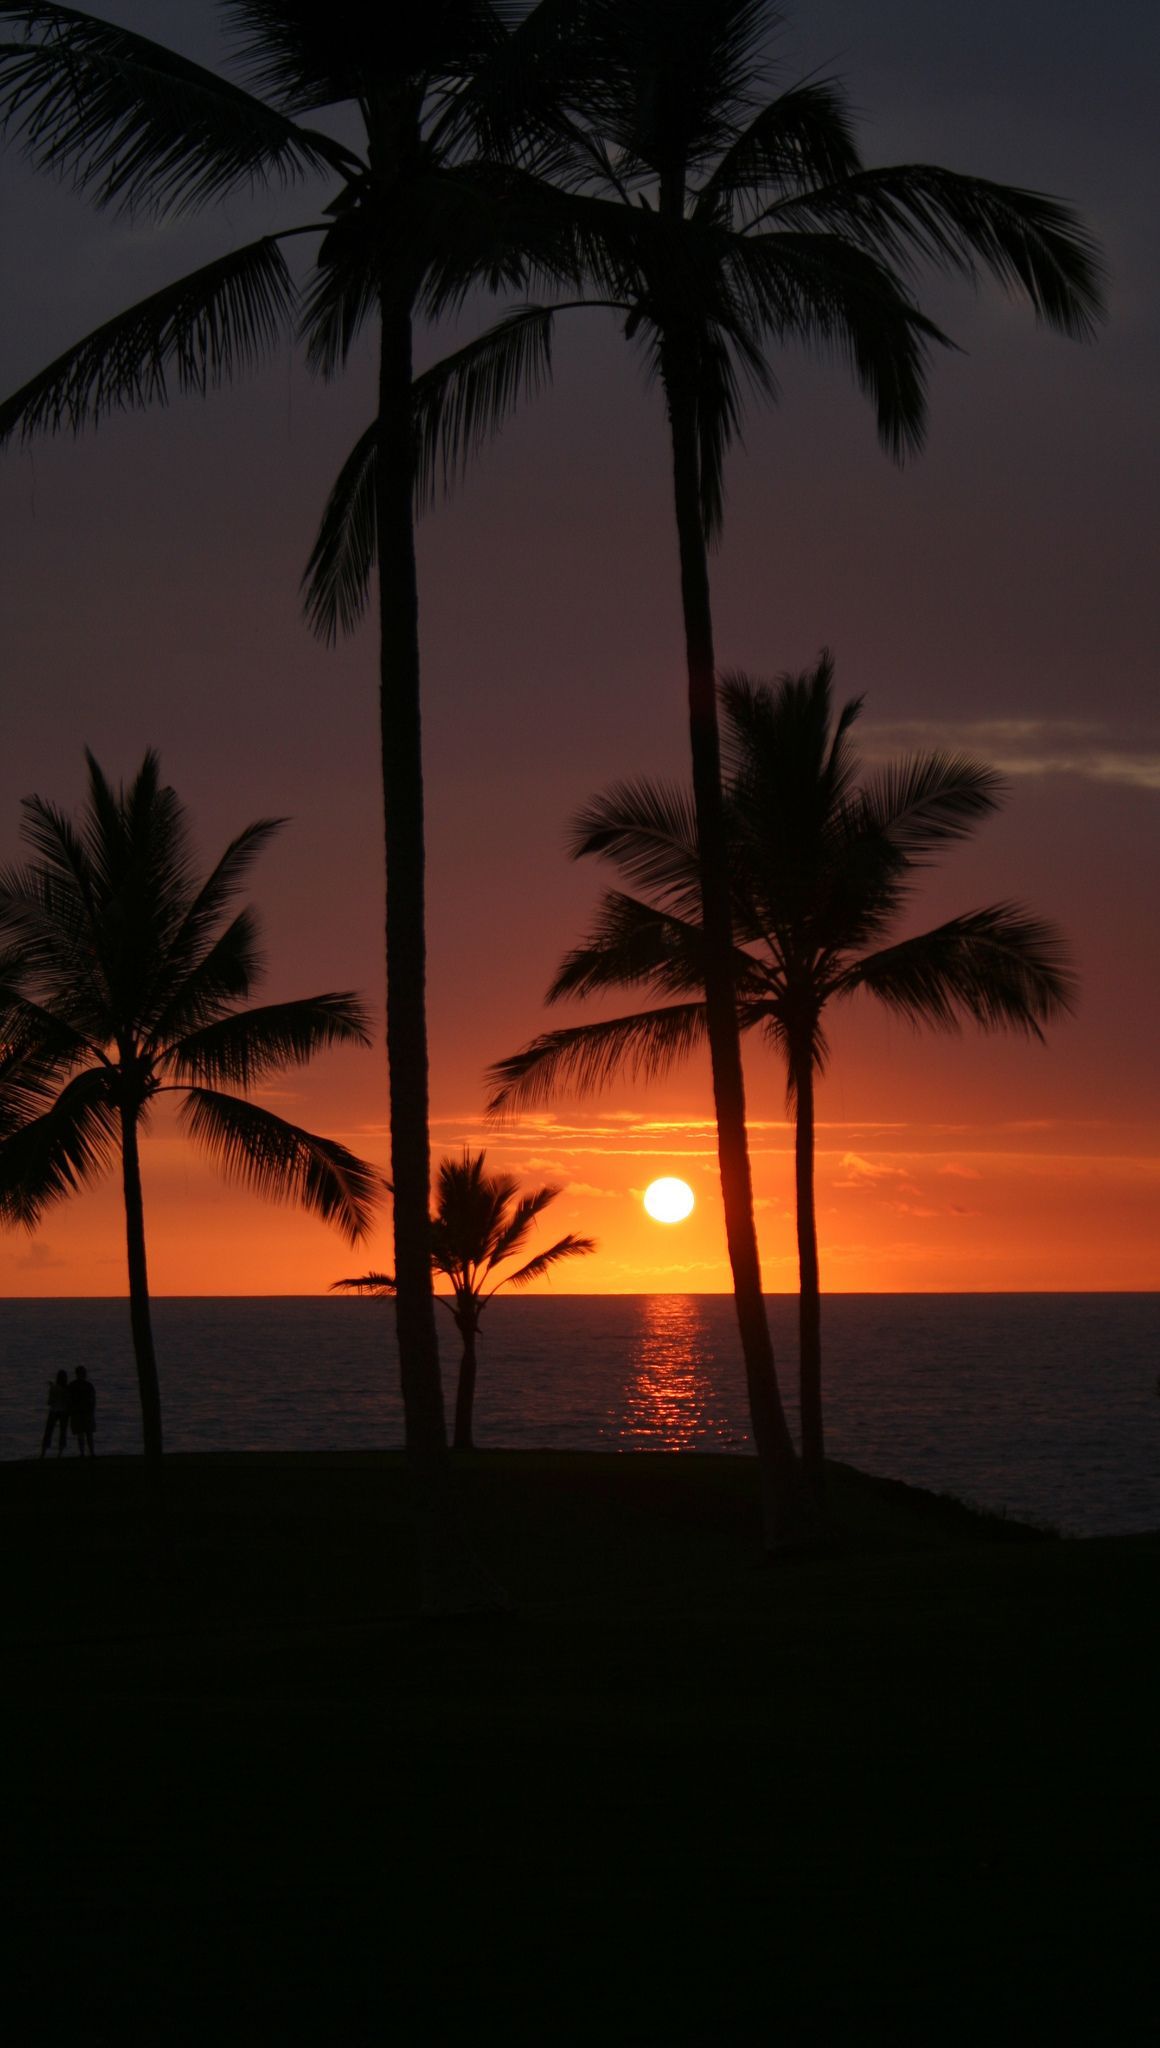 A sunset over the ocean with palm trees - Sunset